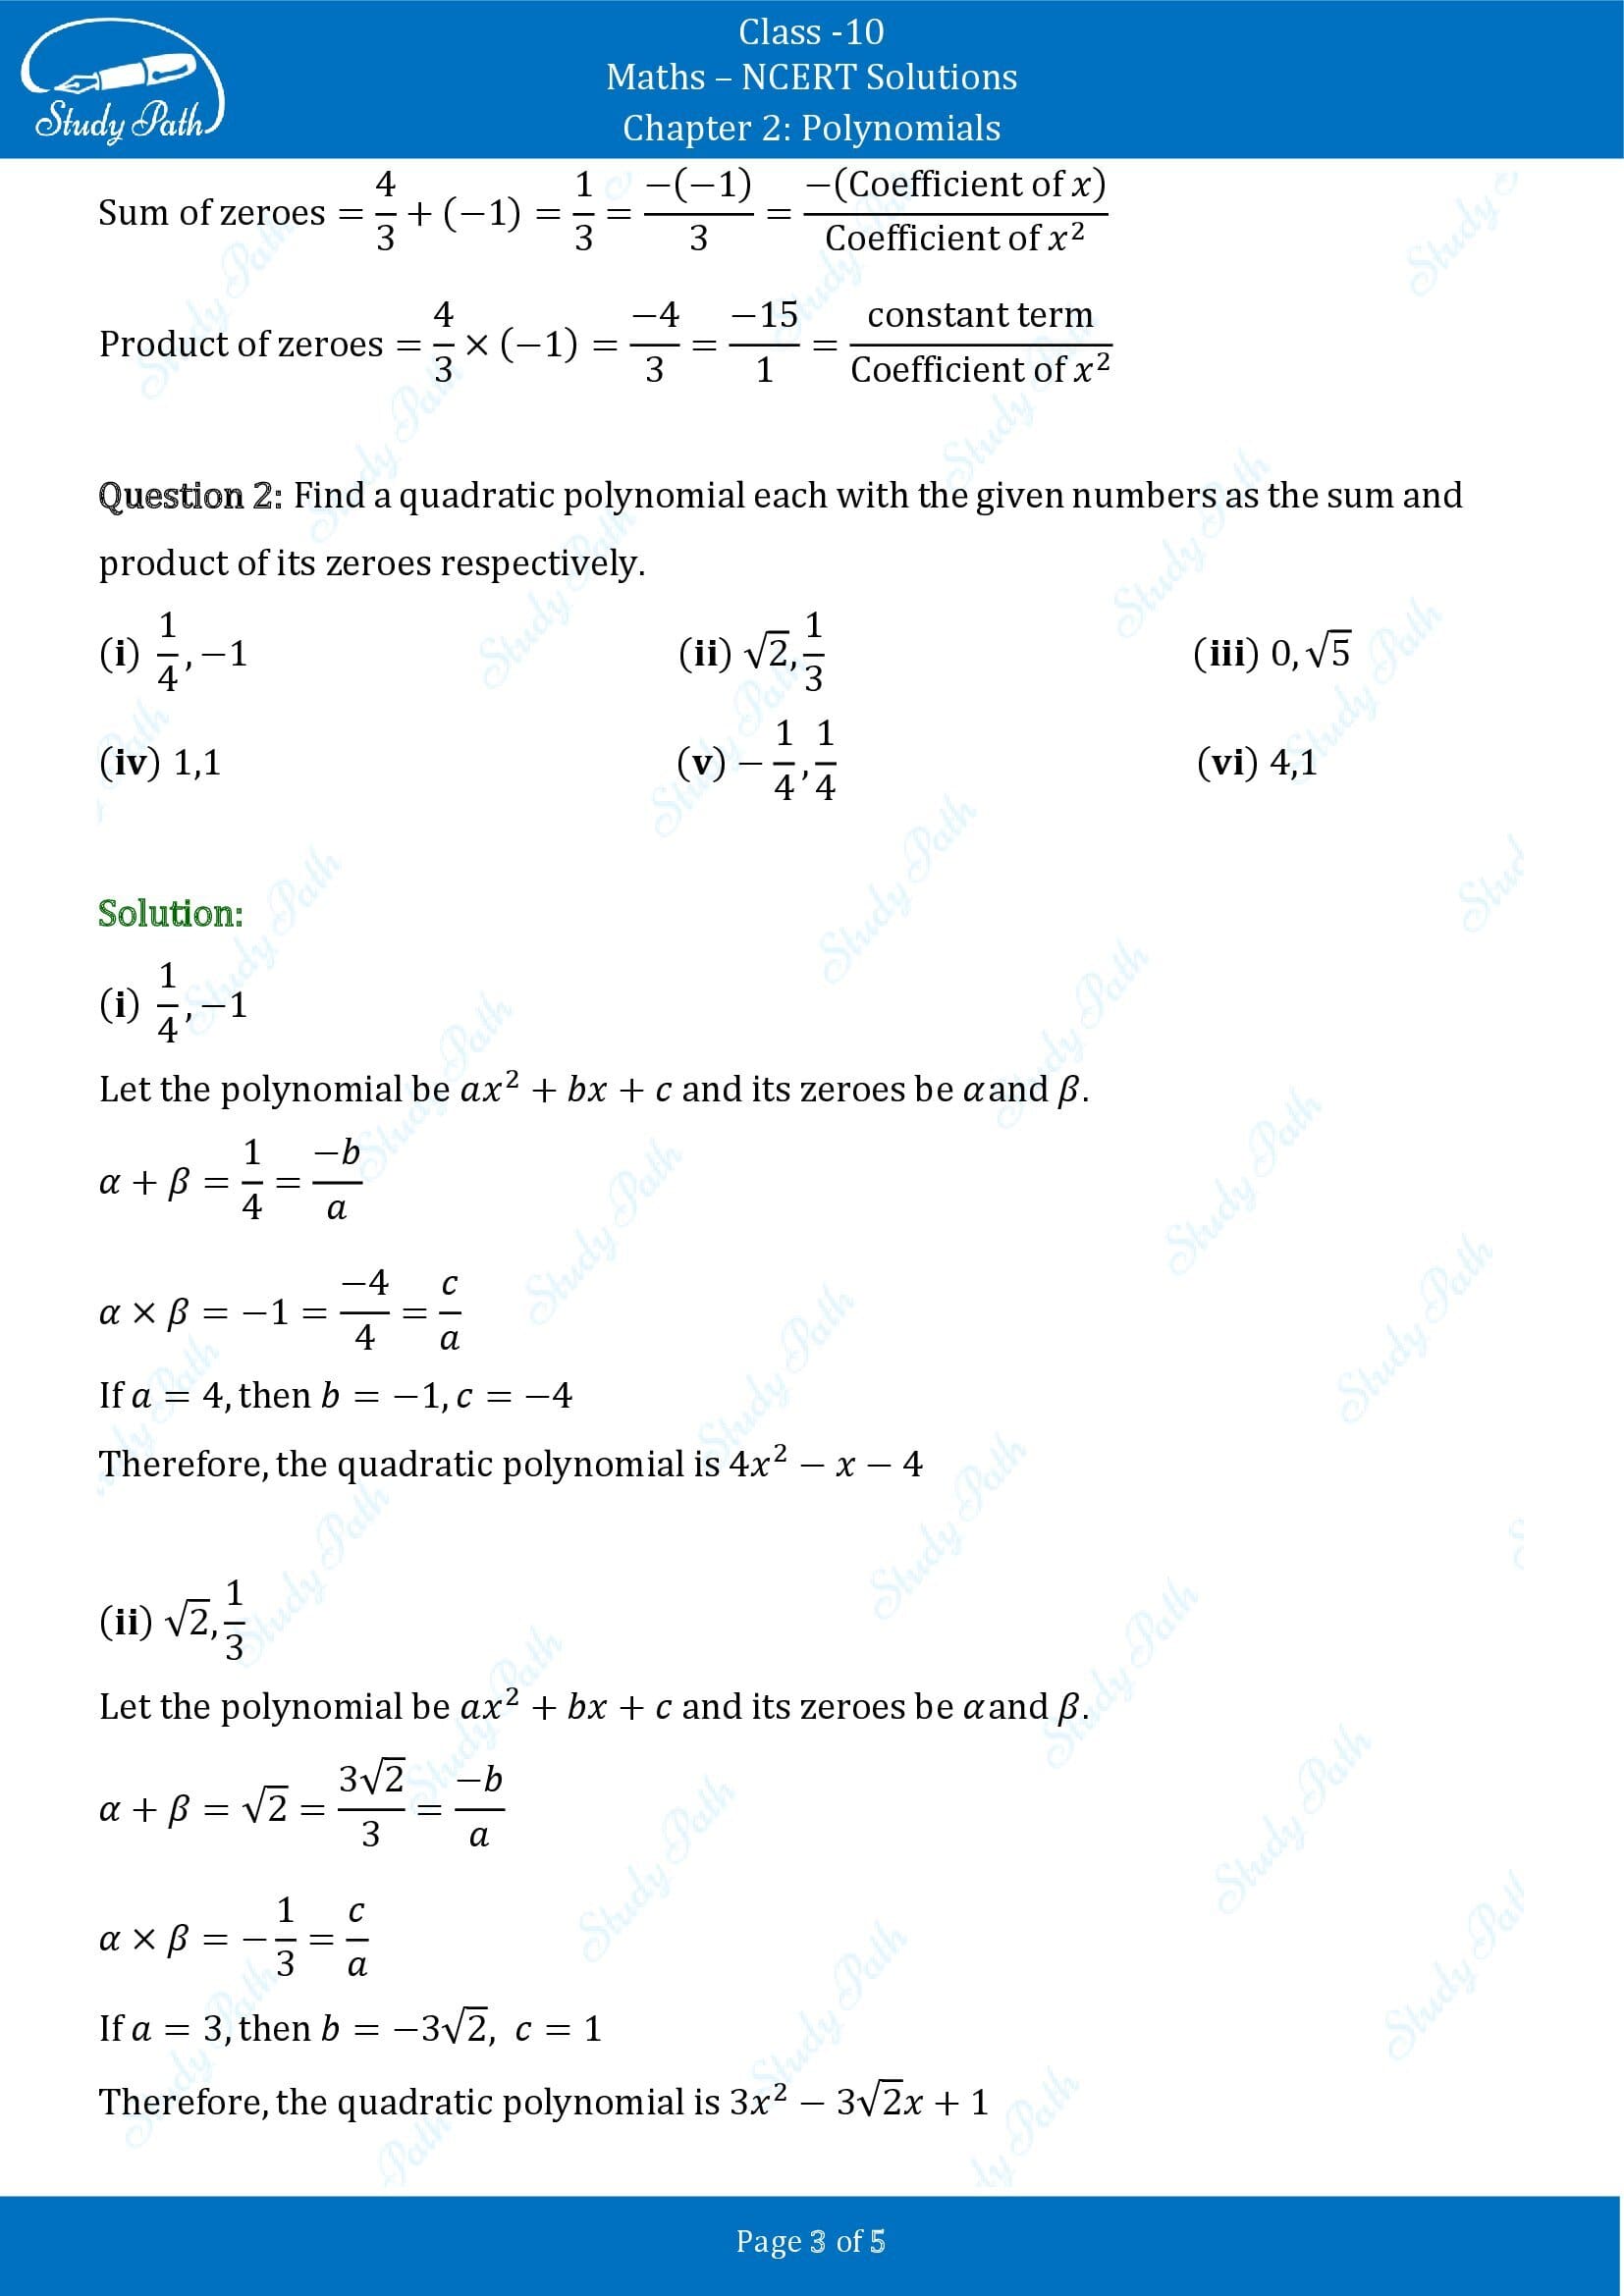 NCERT Solutions for Class 10 Maths Chapter 2 Polynomials Exercise 2.2 00003